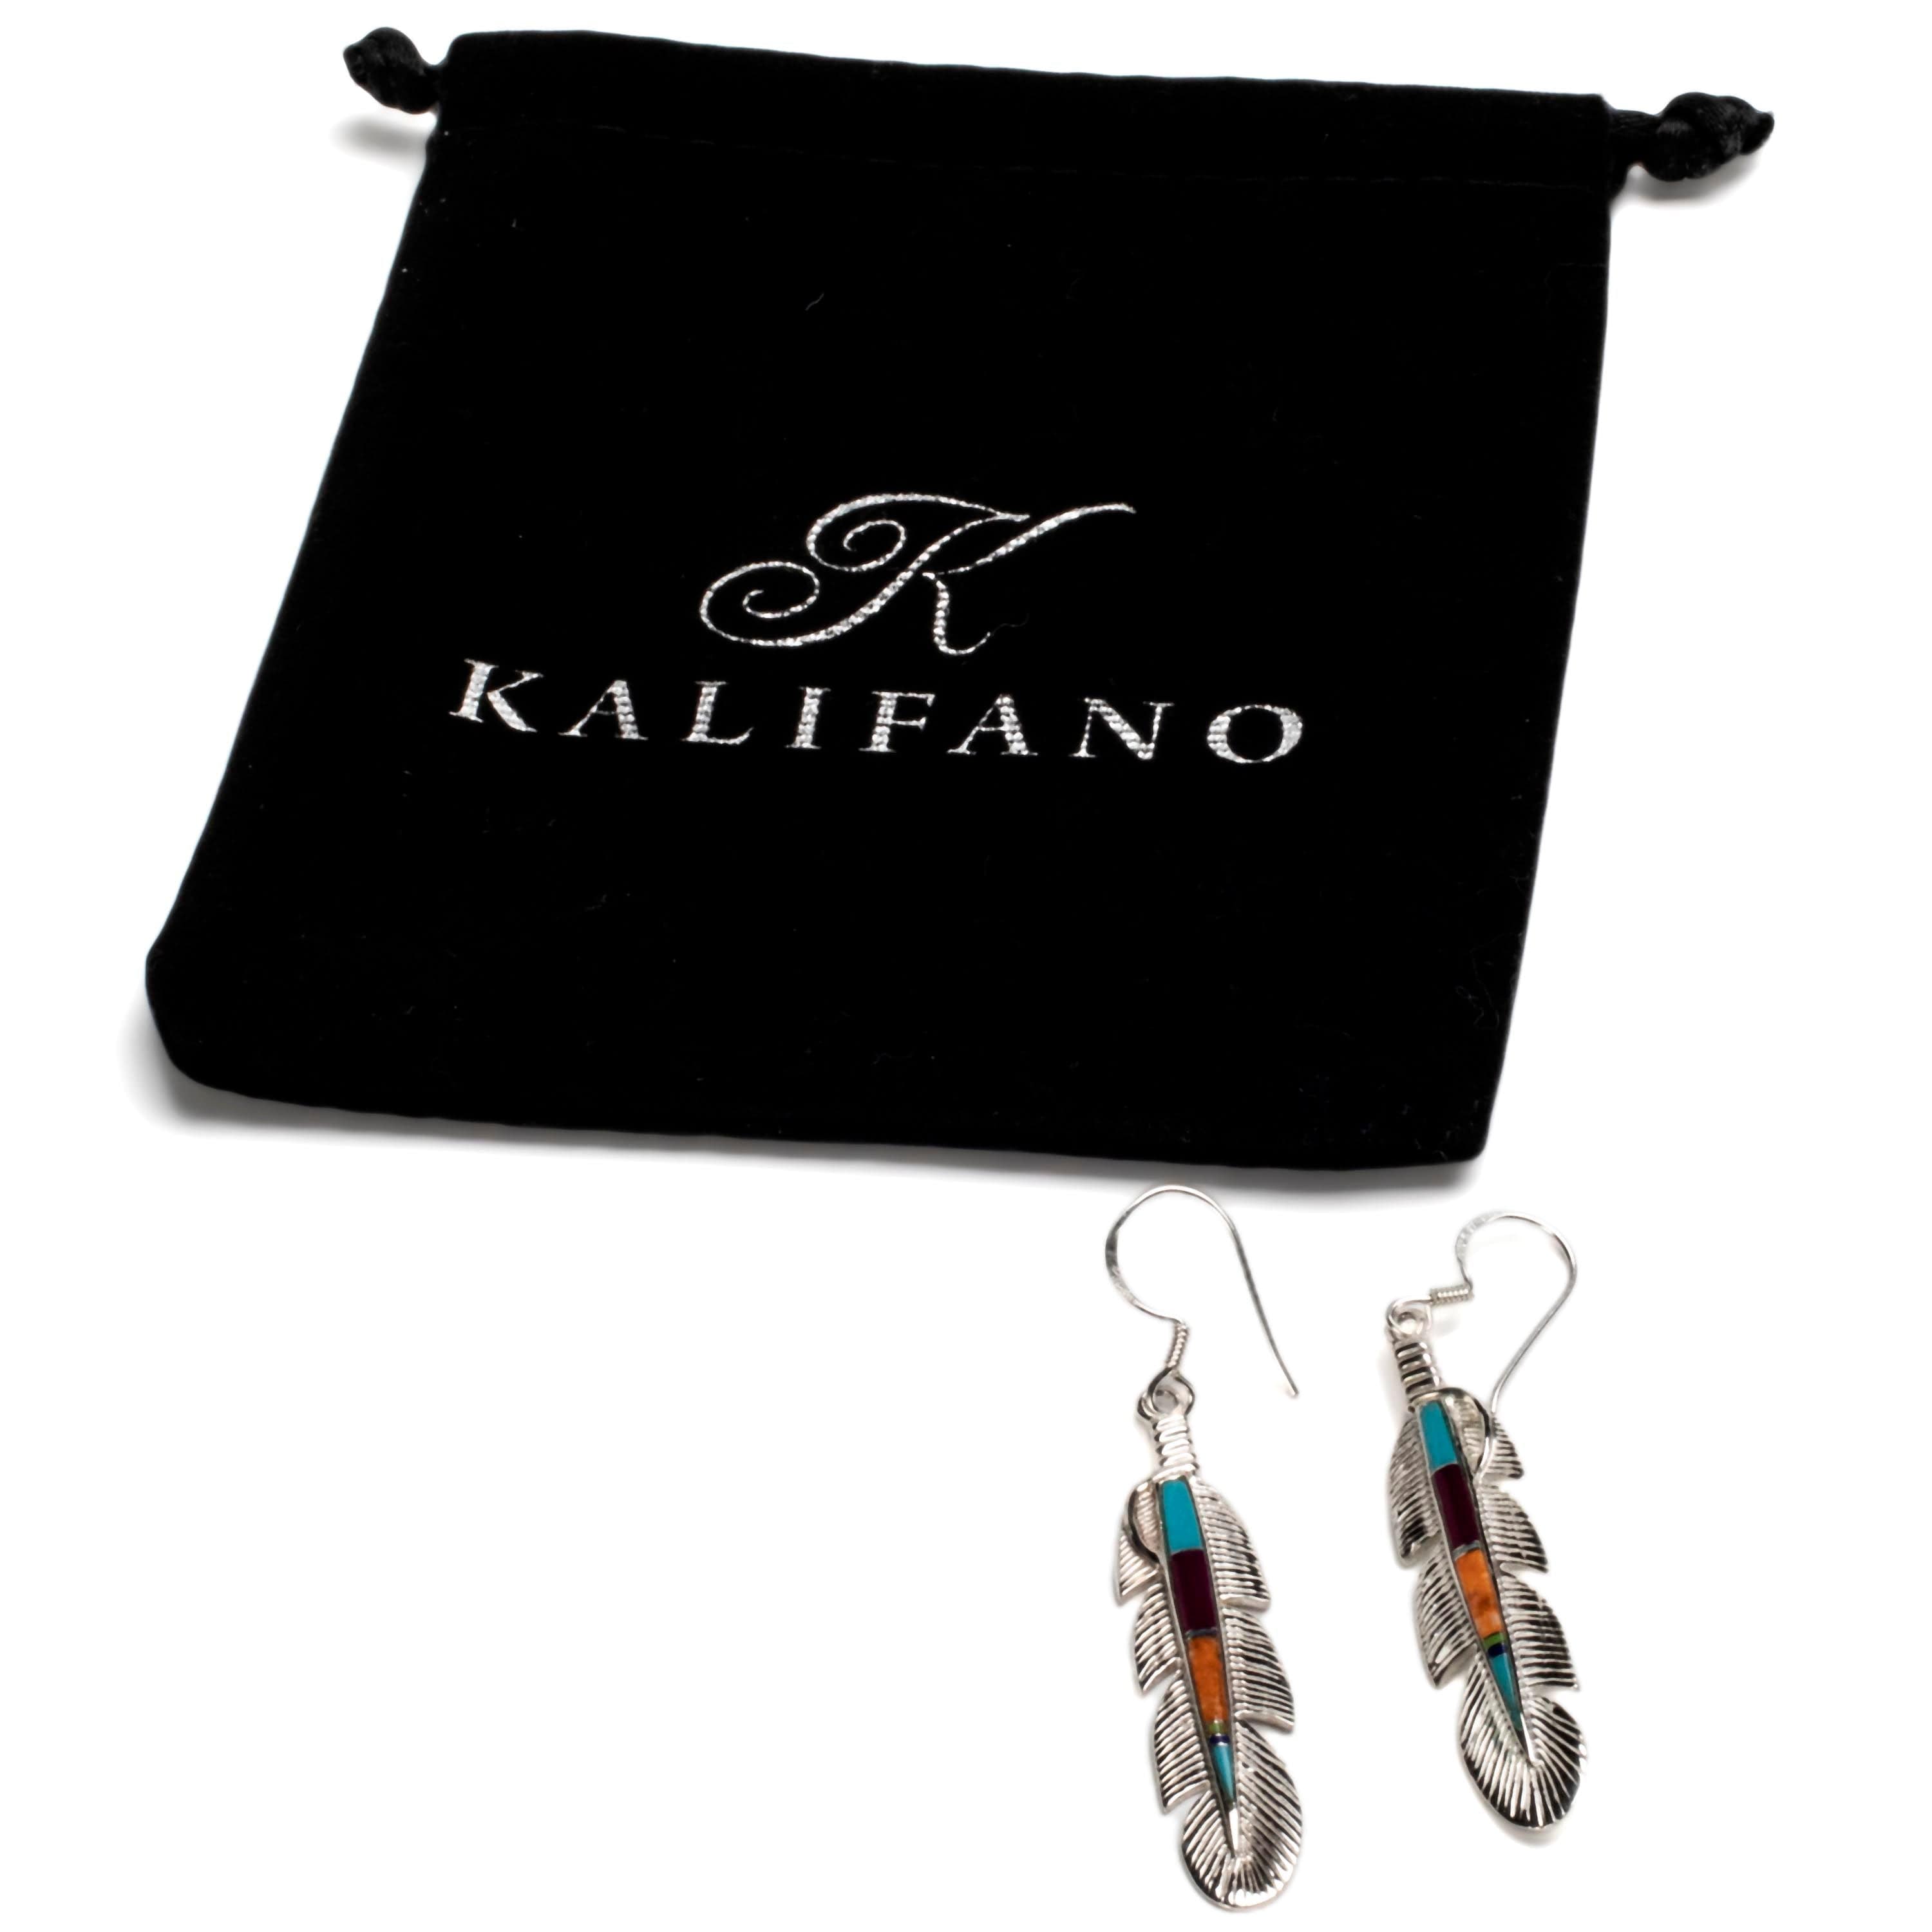 Kalifano Southwest Silver Jewelry Multi Gemstone Feather Earrings Handmade with Sterling Silver and Opal Accent NME.0741.MT